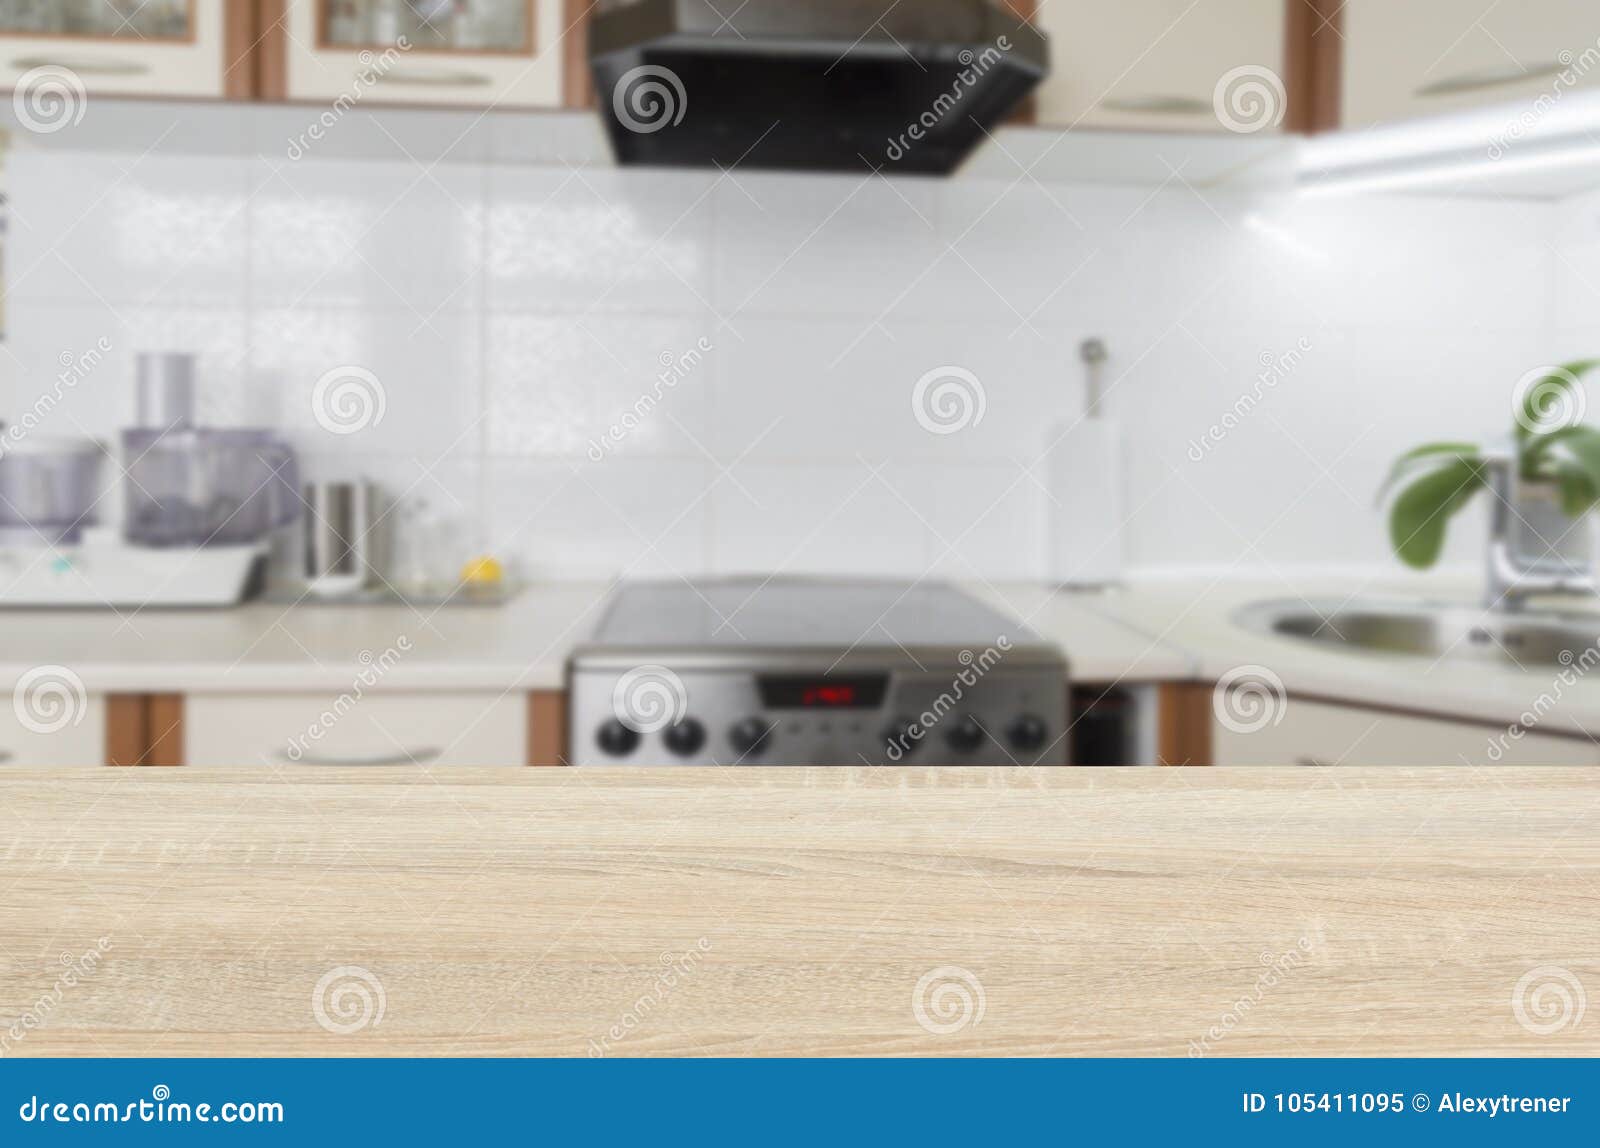 Wooden Textured Table Over Blurred Kitchen Interior Background Stock ...